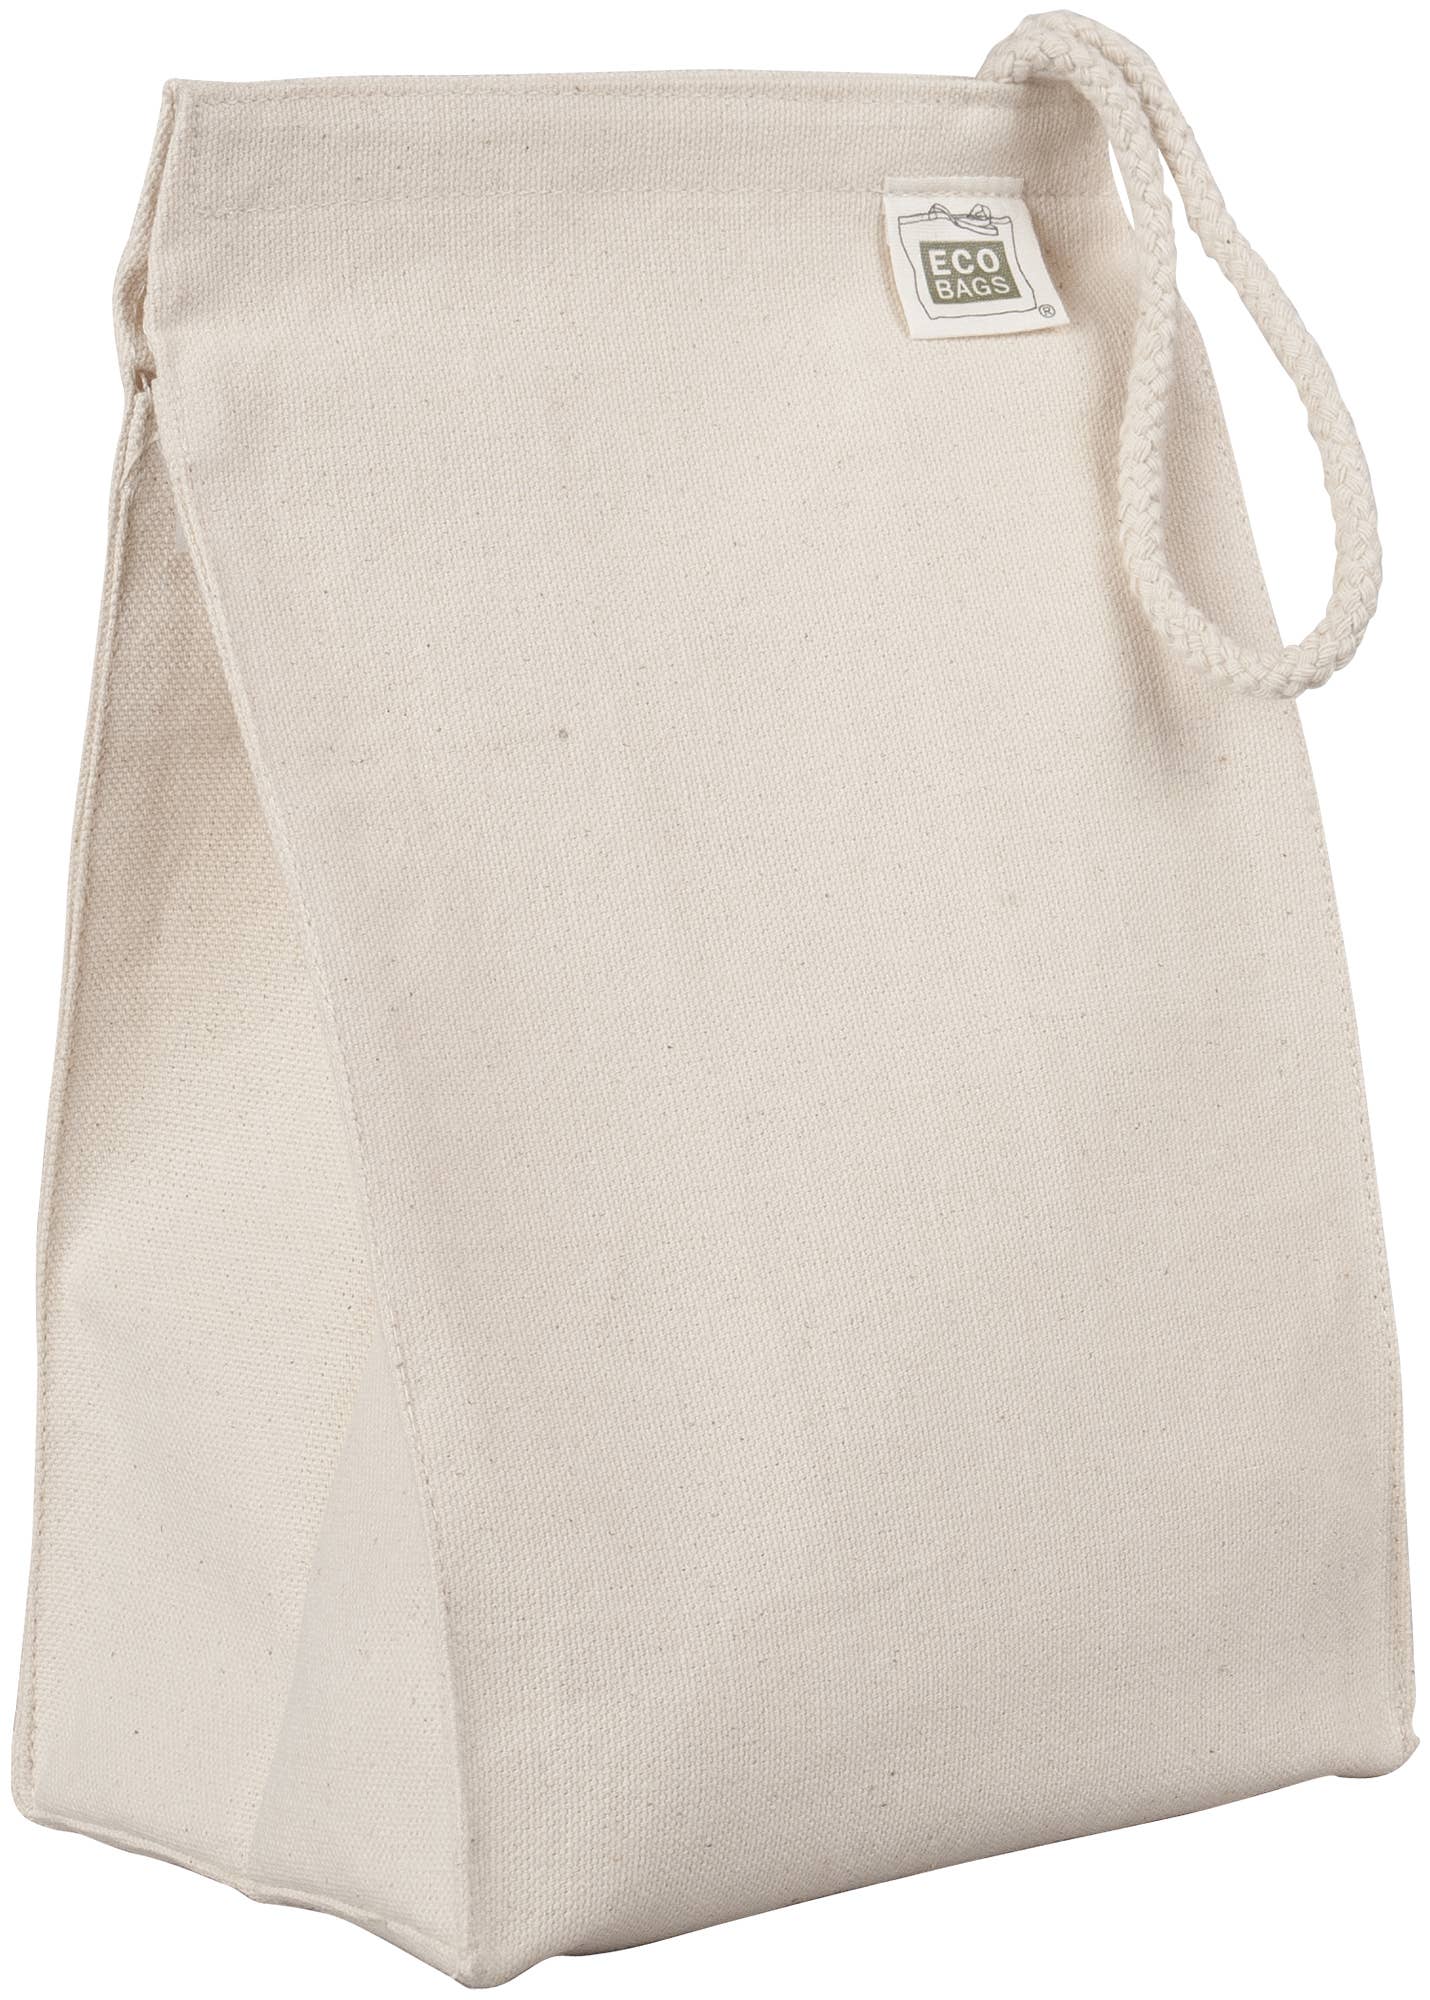 ECOBAGS 100% Certified Organic Lunch Bag